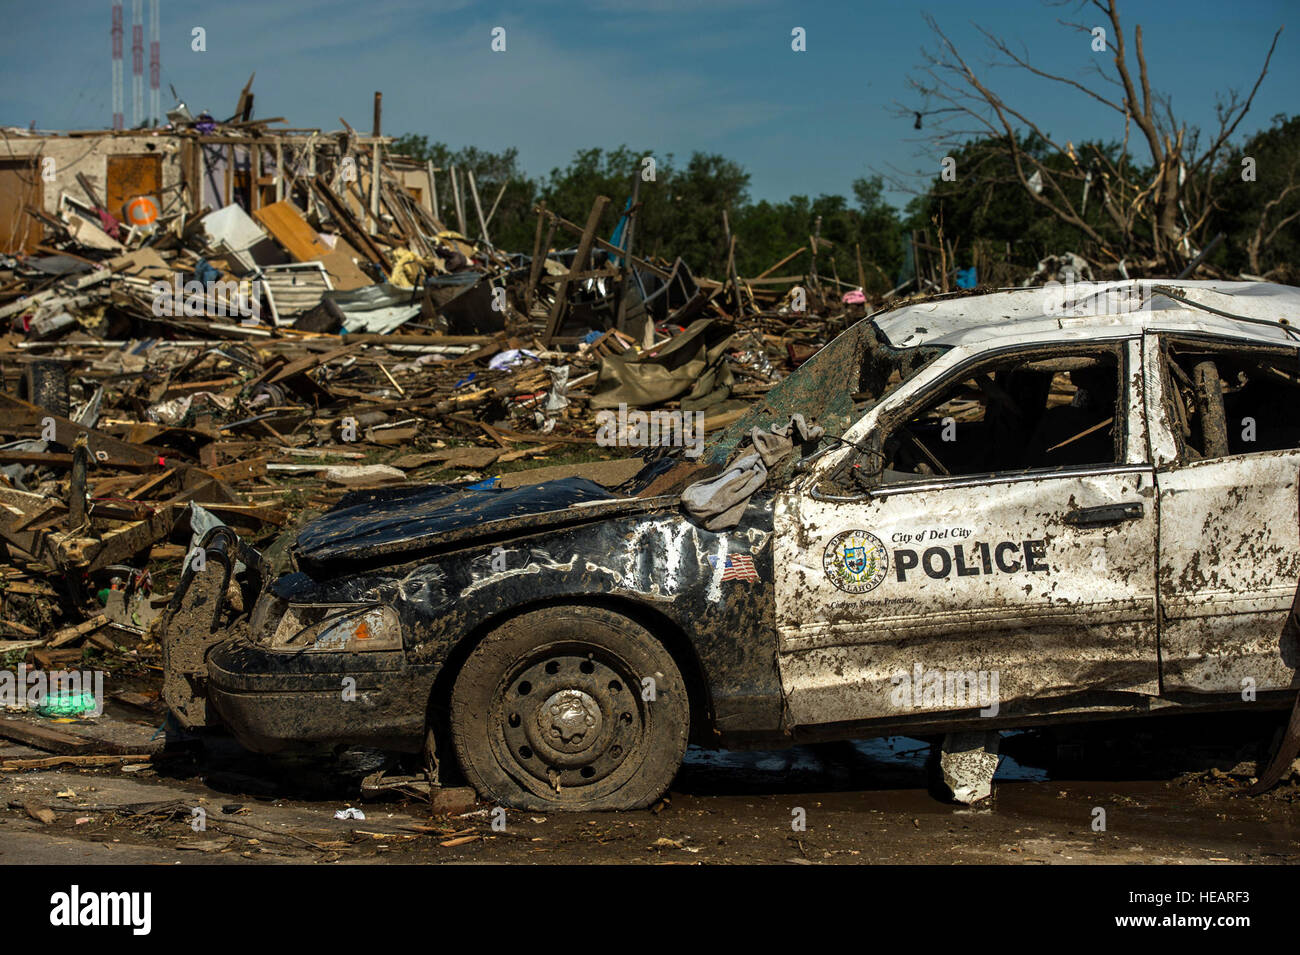 A police car was destroyed by a tornado May 22, 2013, in Moore, Okla. The EF-5 tornado, with winds reaching at least 200 mph, traveled for 20 miles, leaving a two-mile-wide path of destruction, leveling homes, crushing vehicles, and killing more than 20 people. More than 115 Oklahoma National Guard have been activated to assist in the rescue and relief efforts.  Staff Sgt. Jonathan Snyder/ Released) Stock Photo